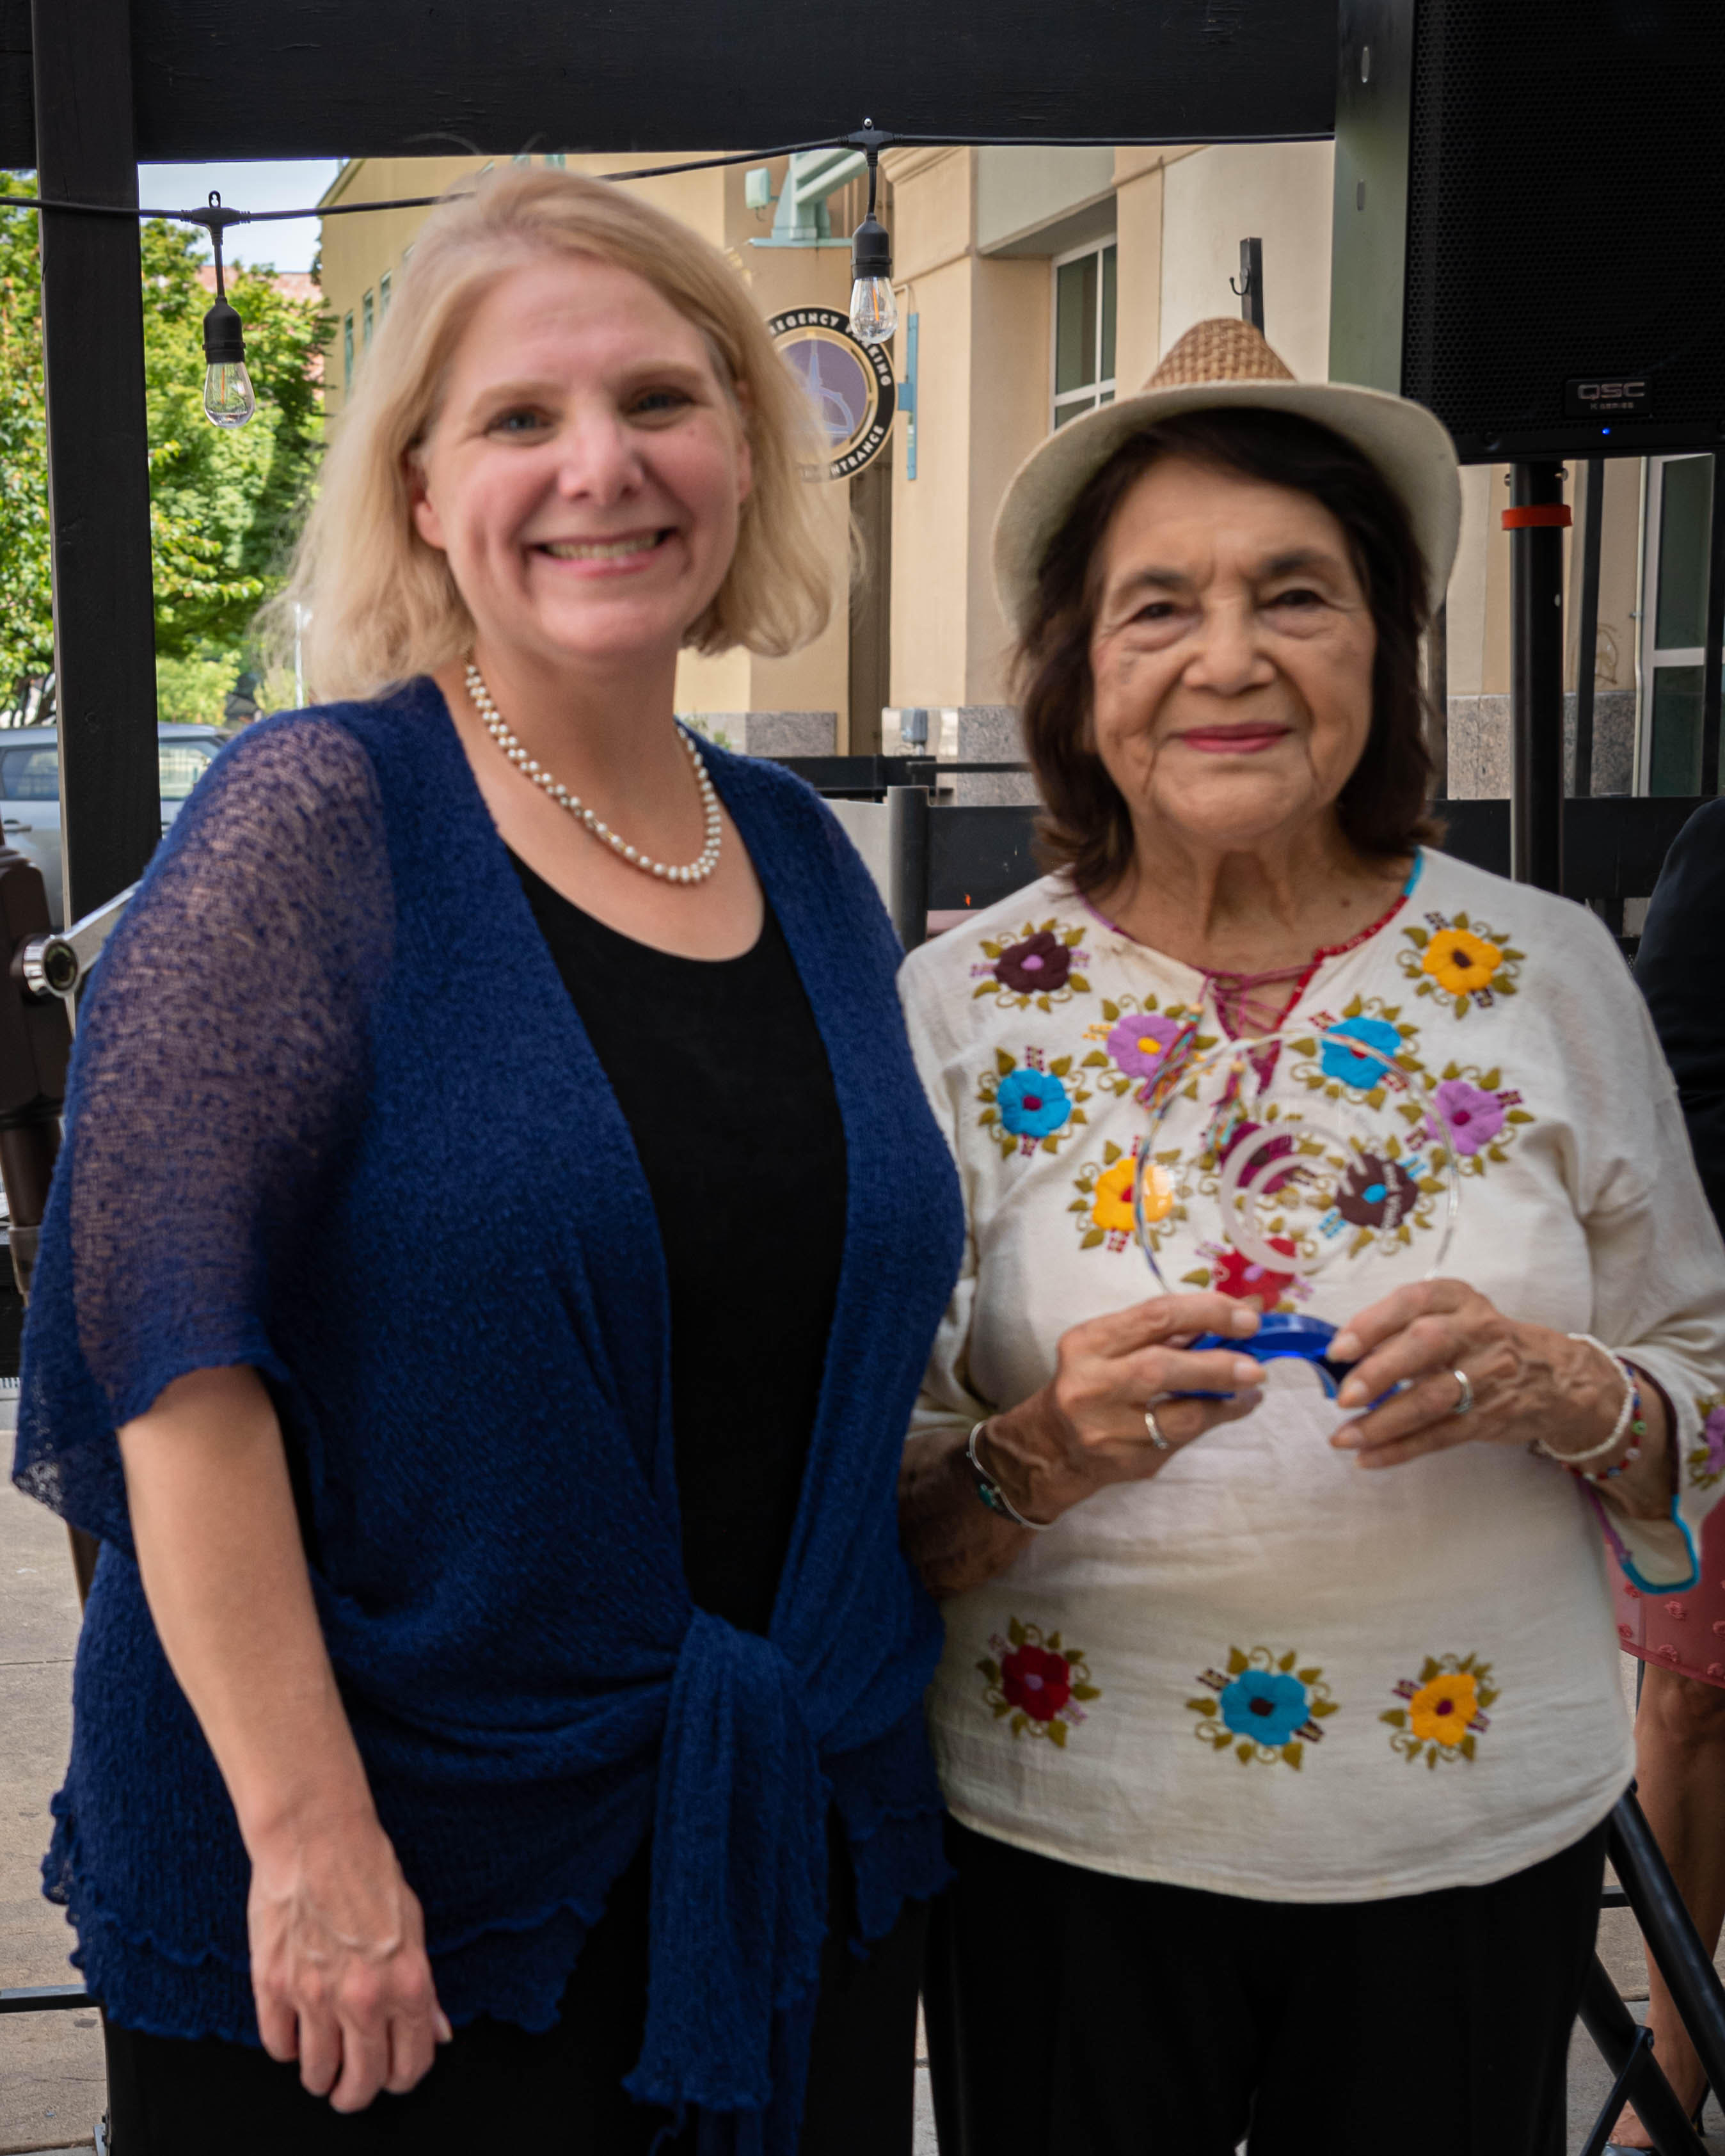 Kim Callinan, a blonde haired woman wearing a blue shawl and black dress, and Dolores Huerta, a black haired woman wearing a white fedora and white shirt with embroidered flowers, both smiling at the camera. Dolores is holding a glass award.